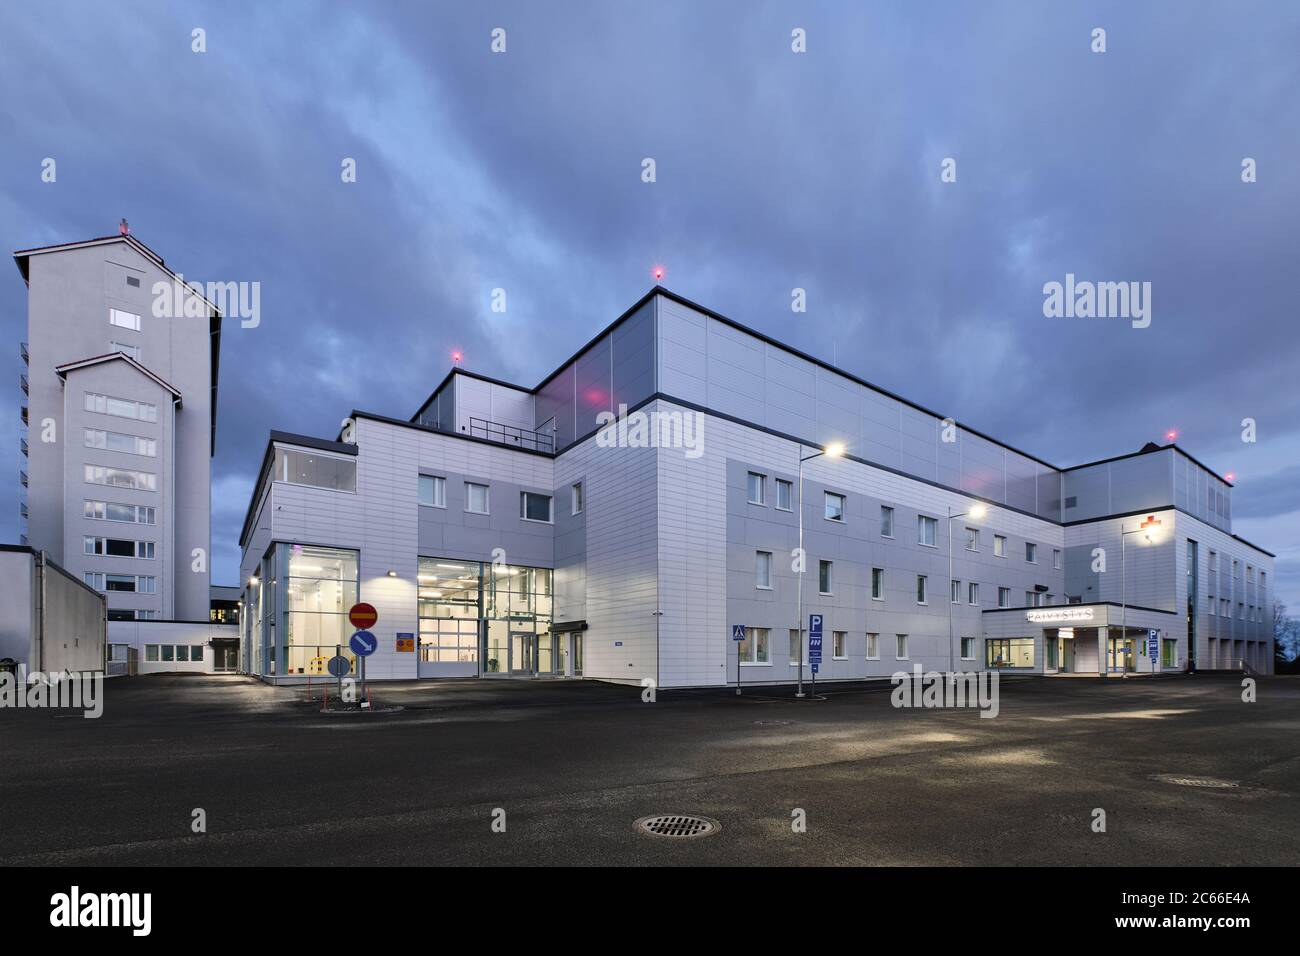 Joensuu, Finland - April 26, 2020: The brand new building of North Karelia Central Hospital emergency rooms. Stock Photo